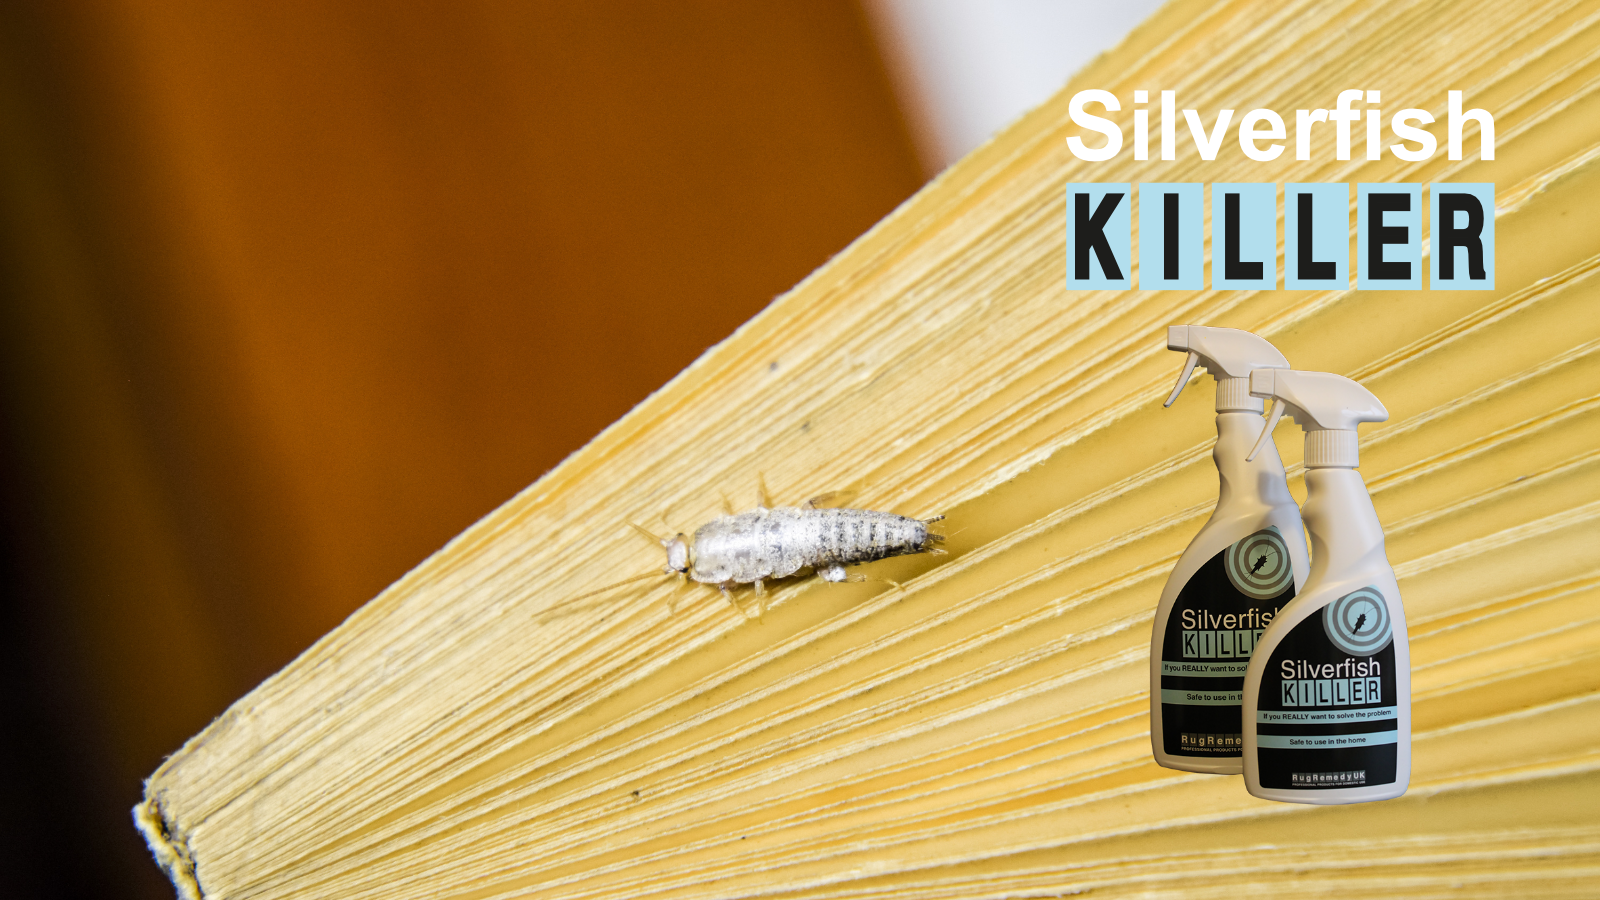 Silverfish live on starch, stop them eating through your precious books & documents.